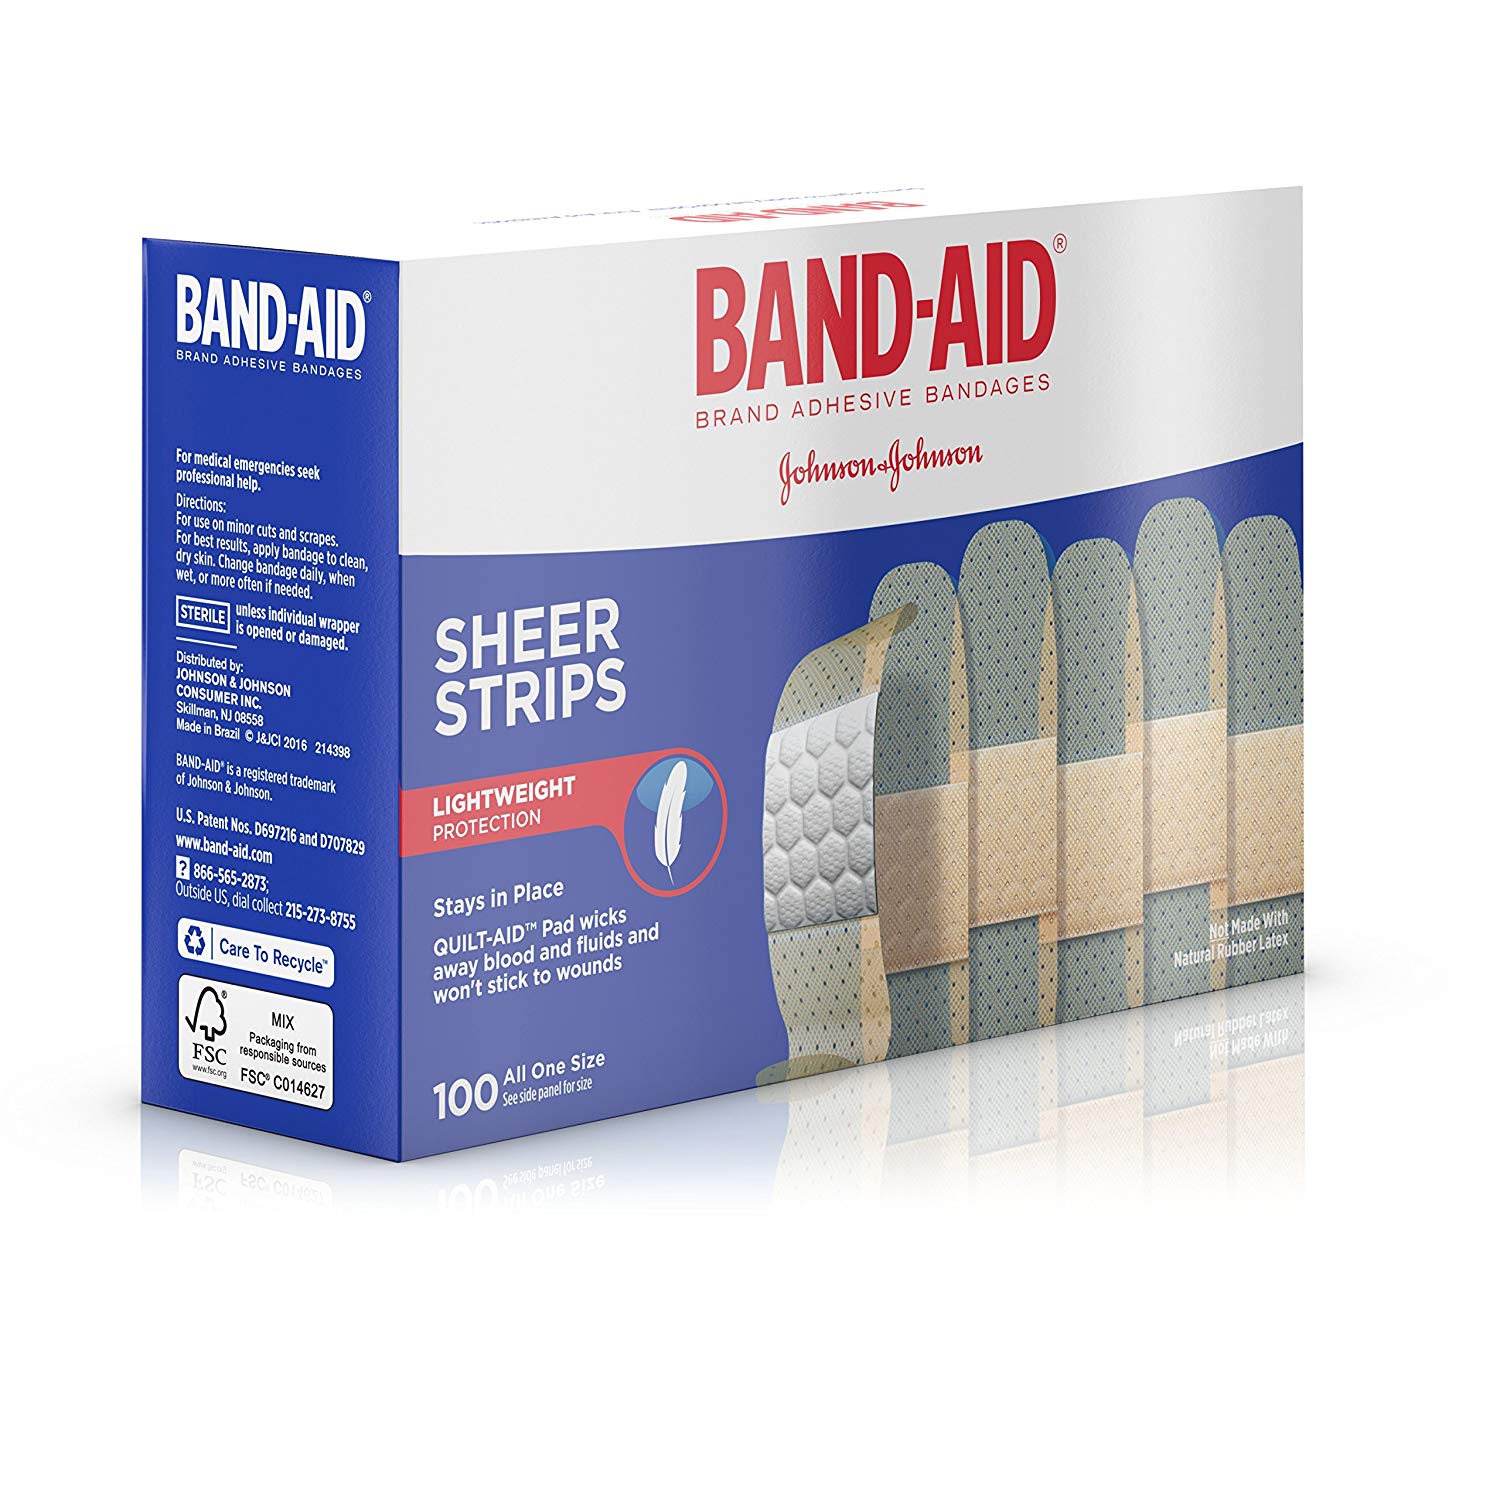 Amazon.com: Band-Aid Brand Adhesive Bandages Sheer, All One Size ...